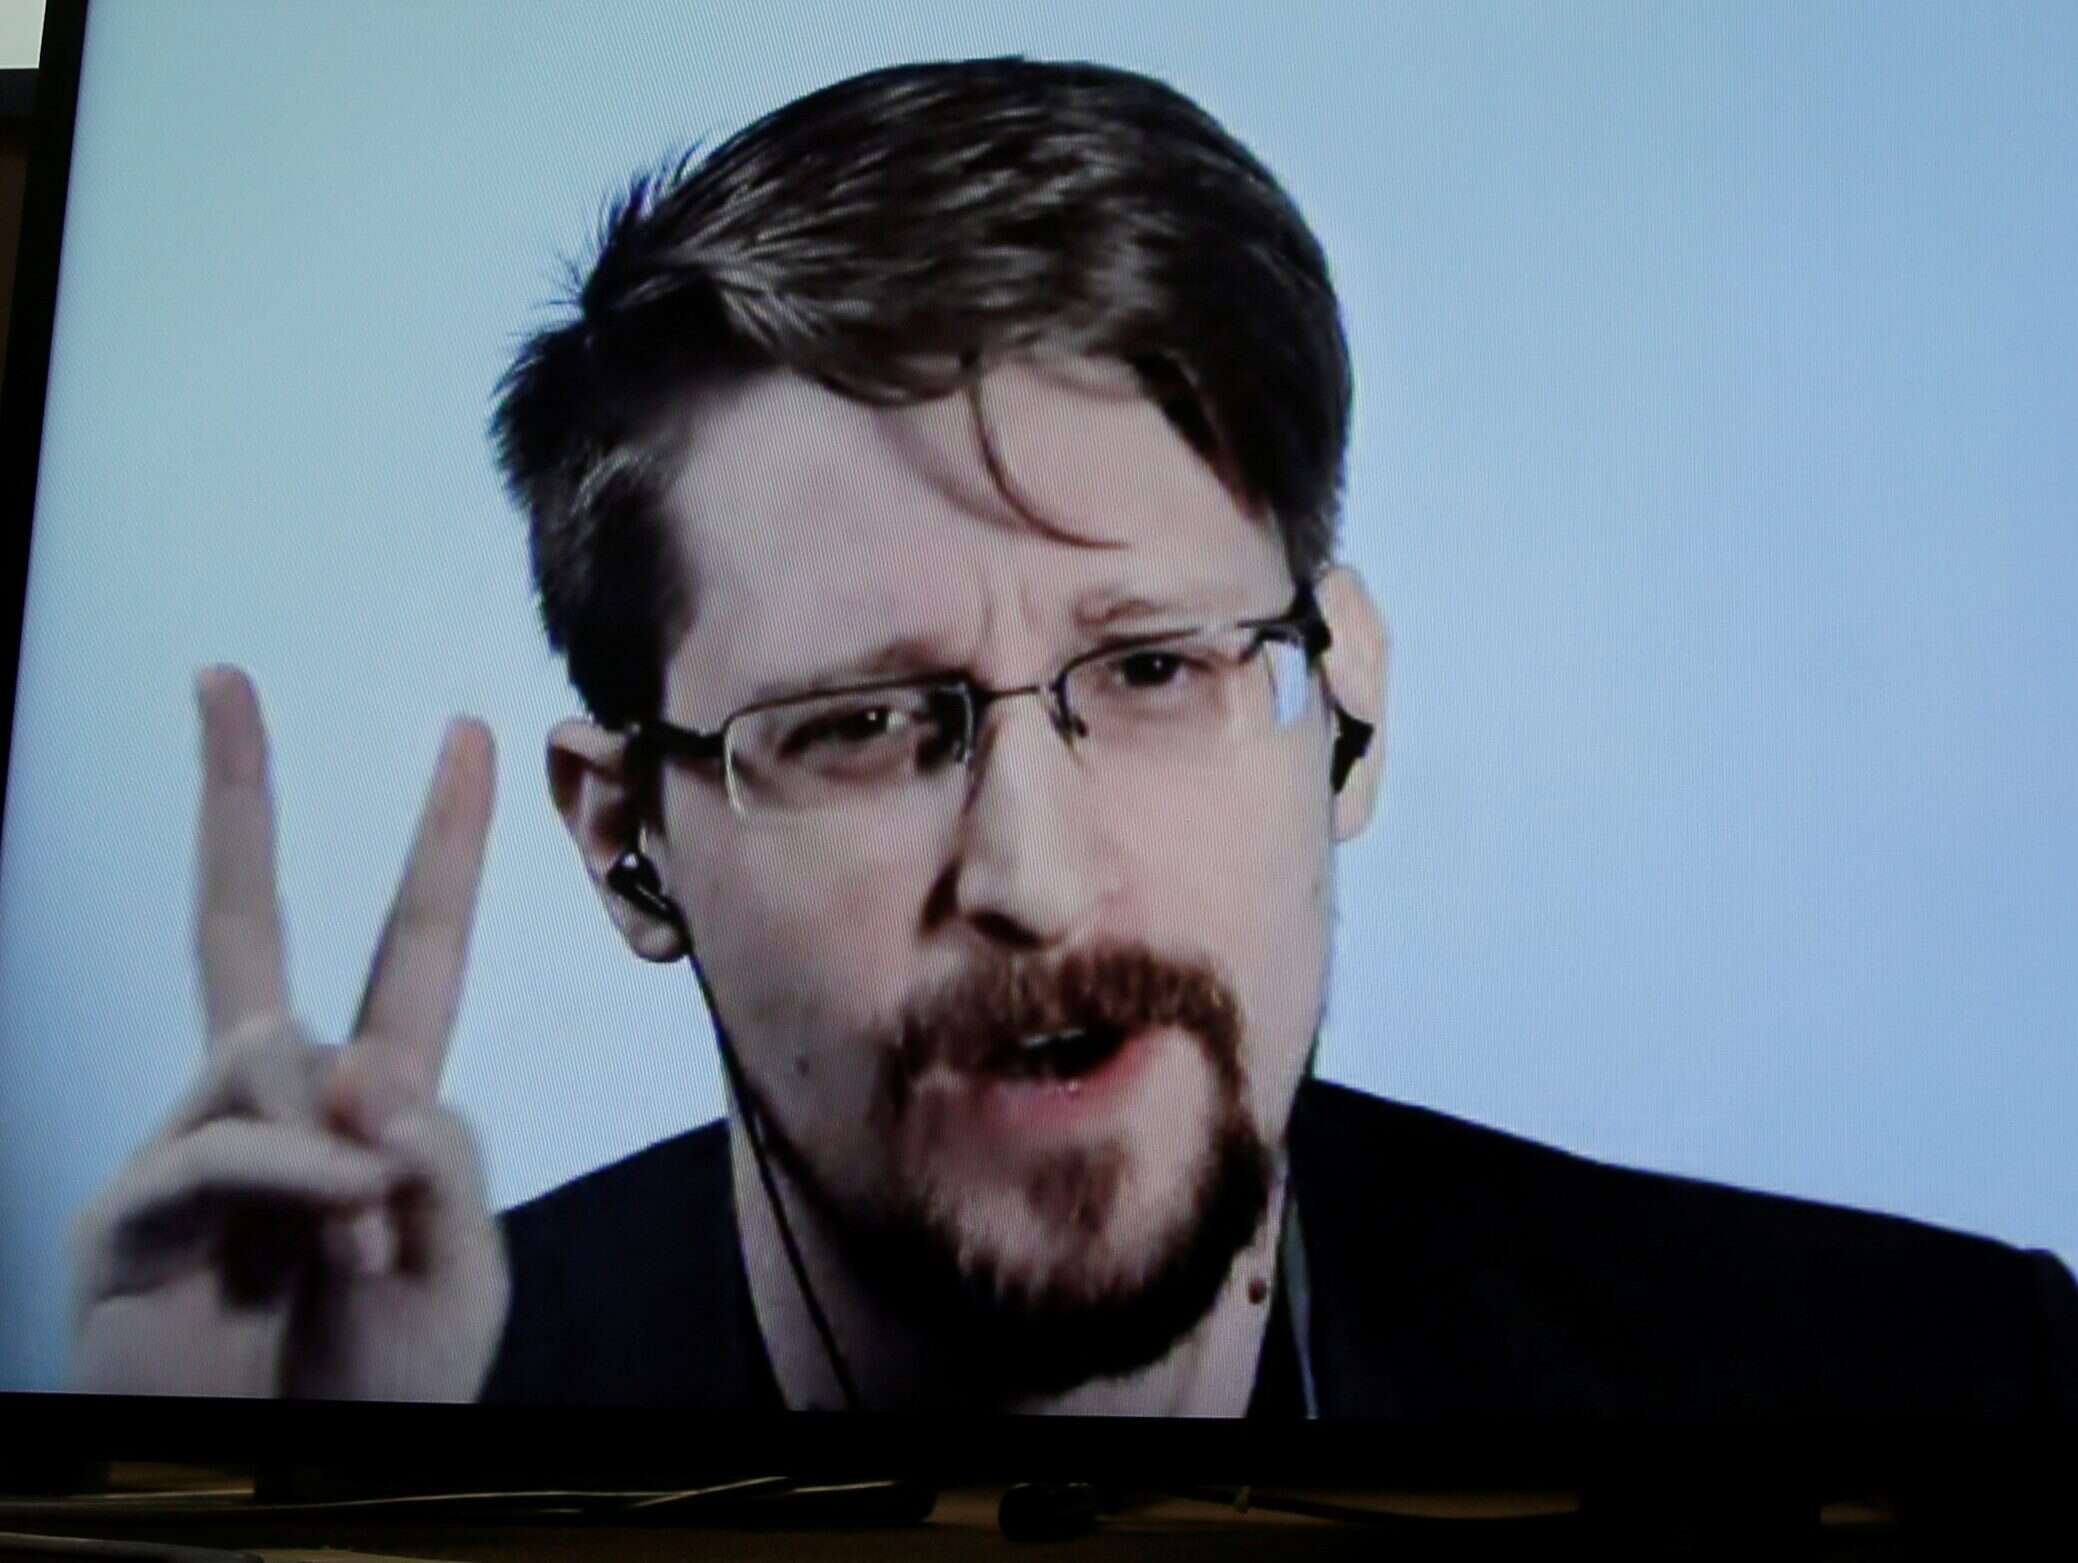 Snowden says 'protecting whistleblowers not hostile act' as he seeks asylum in France